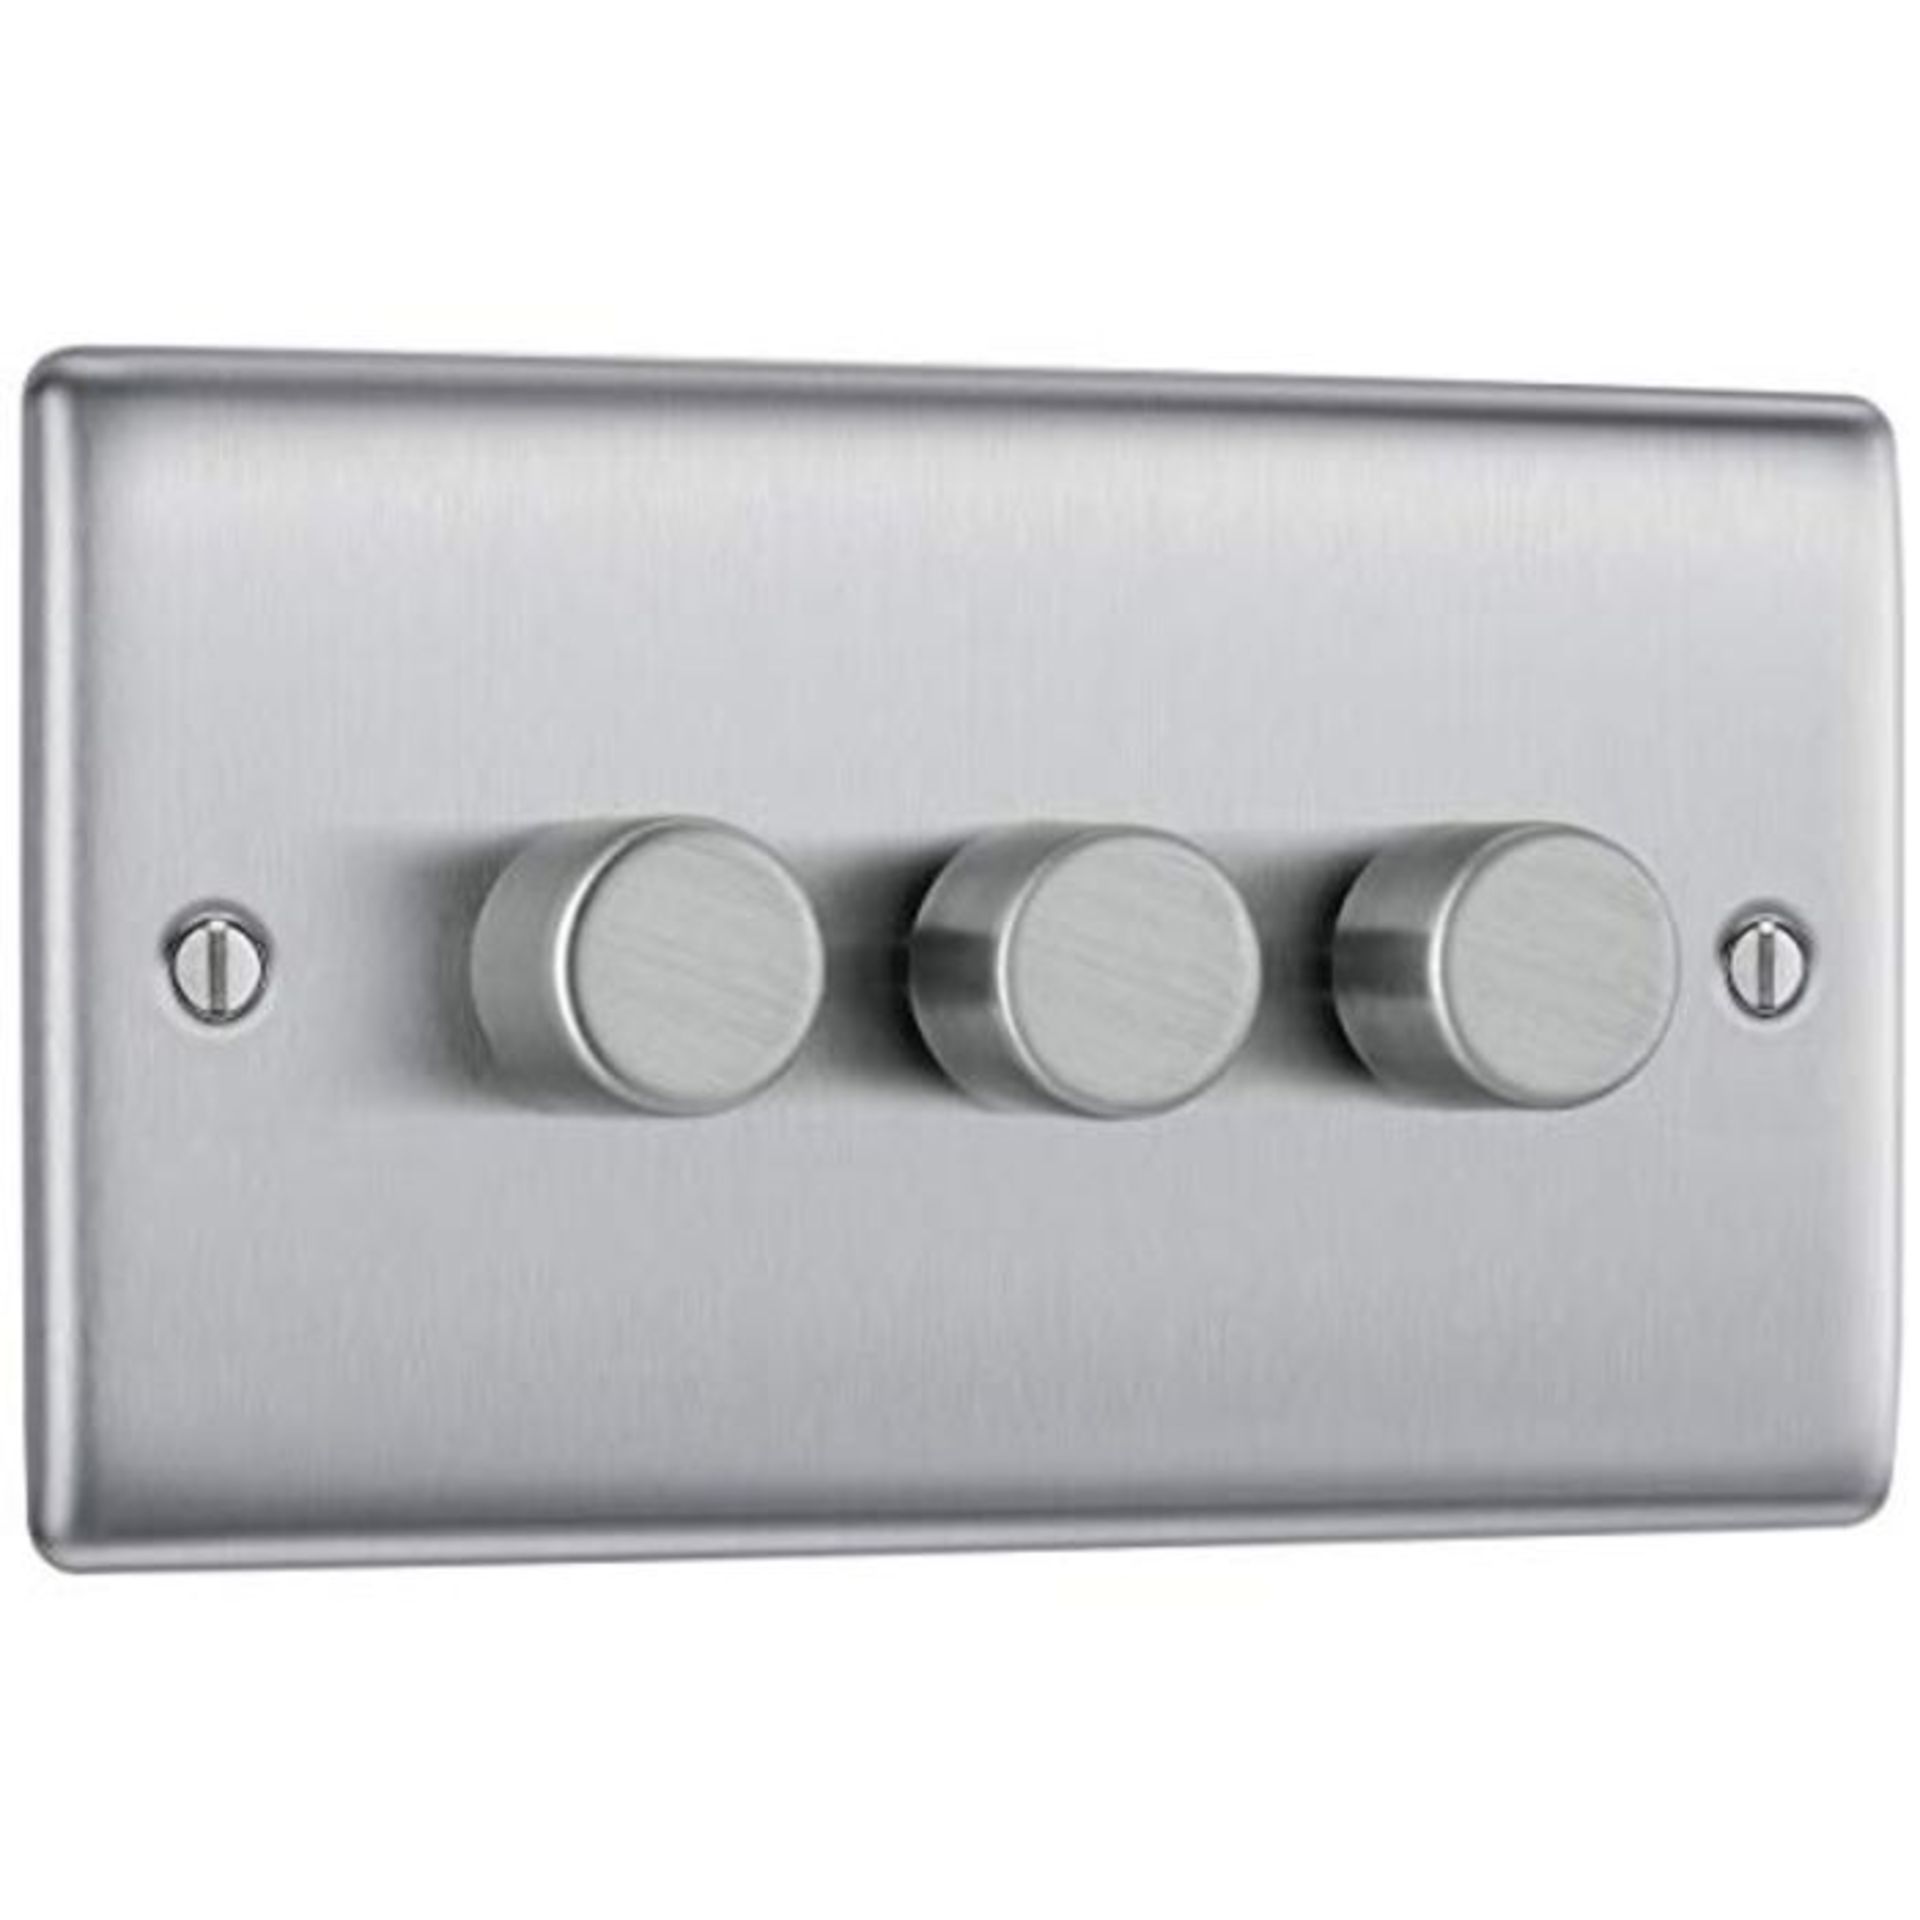 BG Electrical NBS83P-01 Triple Dimmer Light Switch, Brushed Steel, 2-Way, 400 Watts